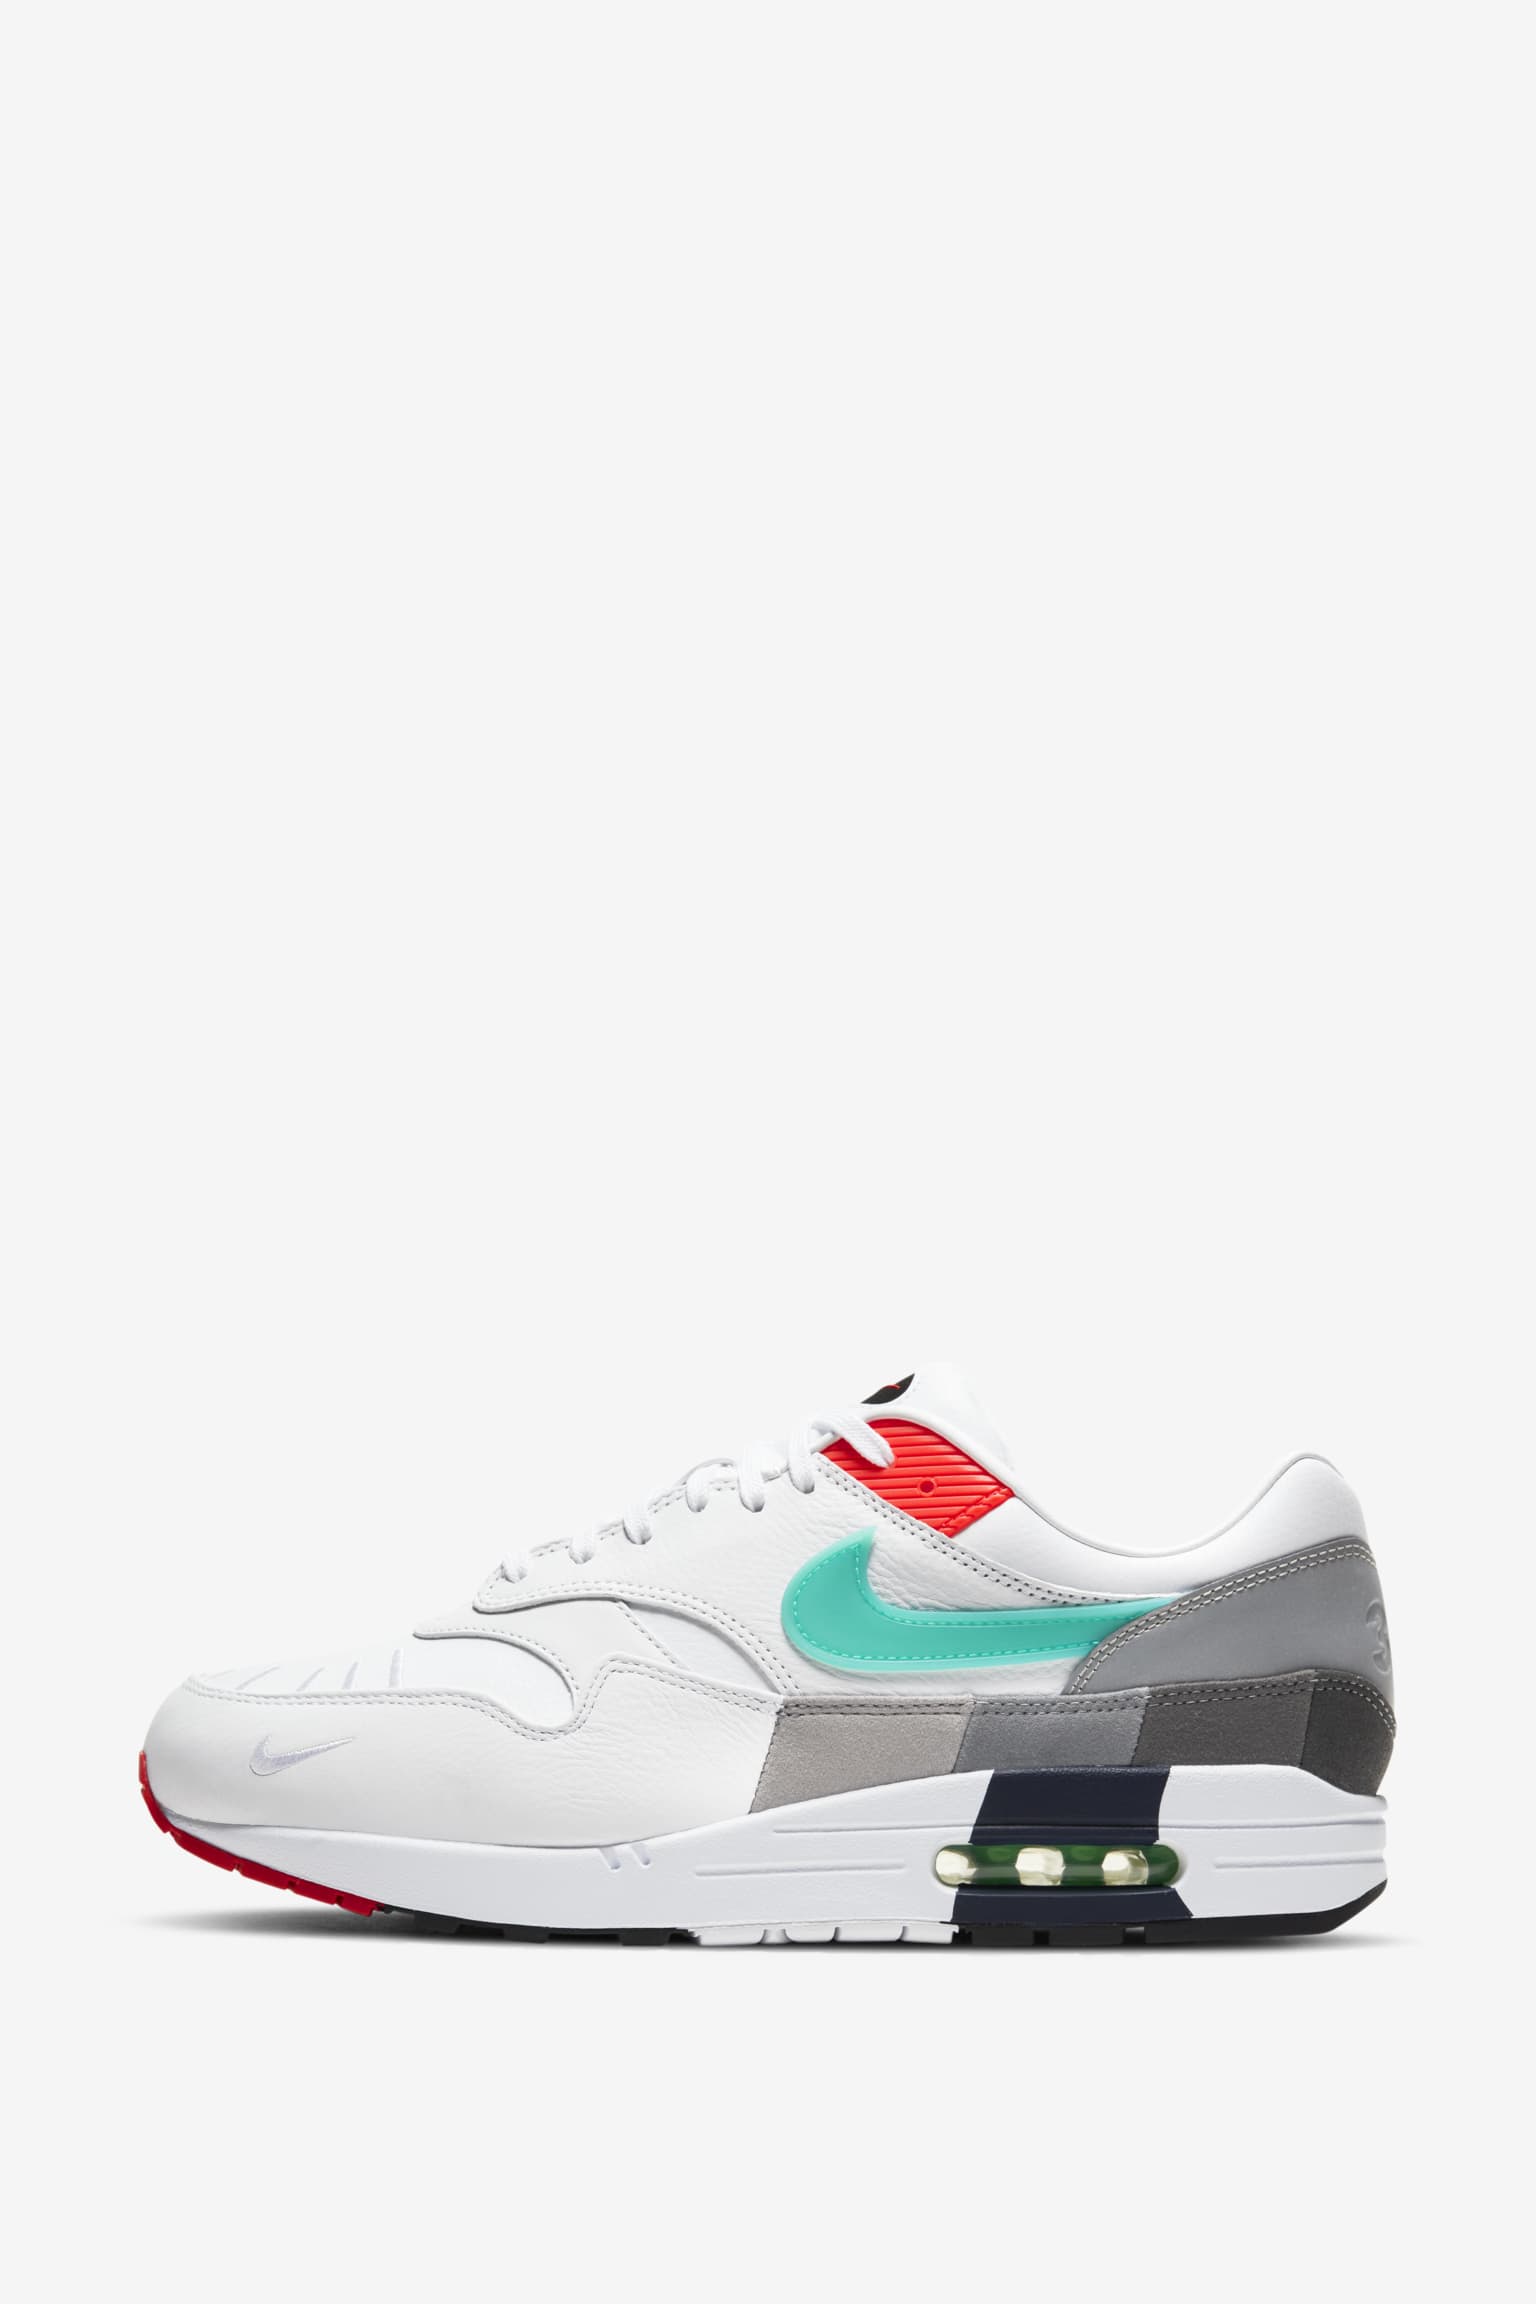 nike air max 1 latest release